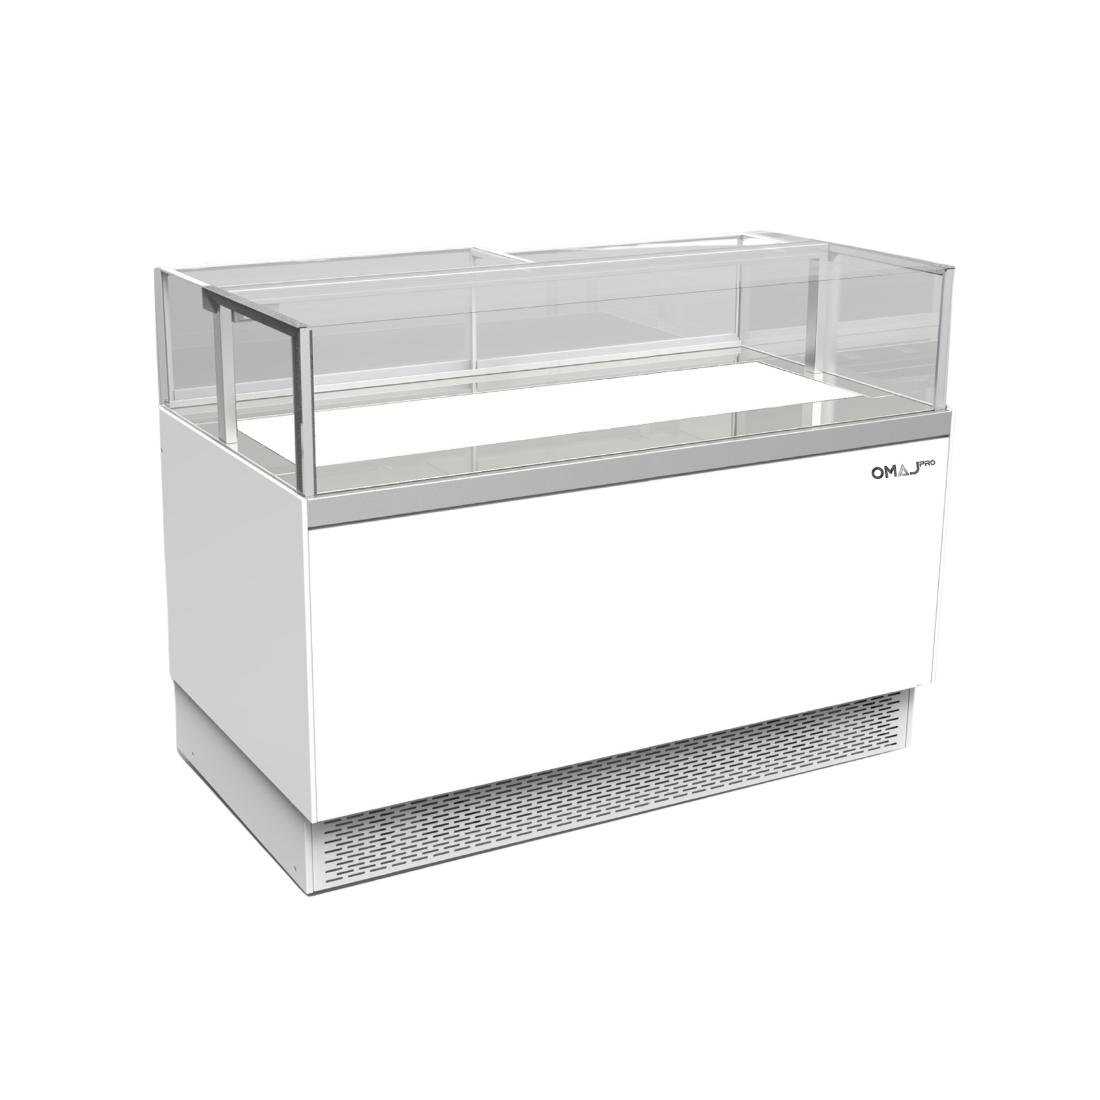 OMAJ PRO ,DICS1800, Display Show Cake and Chocolate Case Bottom With Drawer White 180 cm